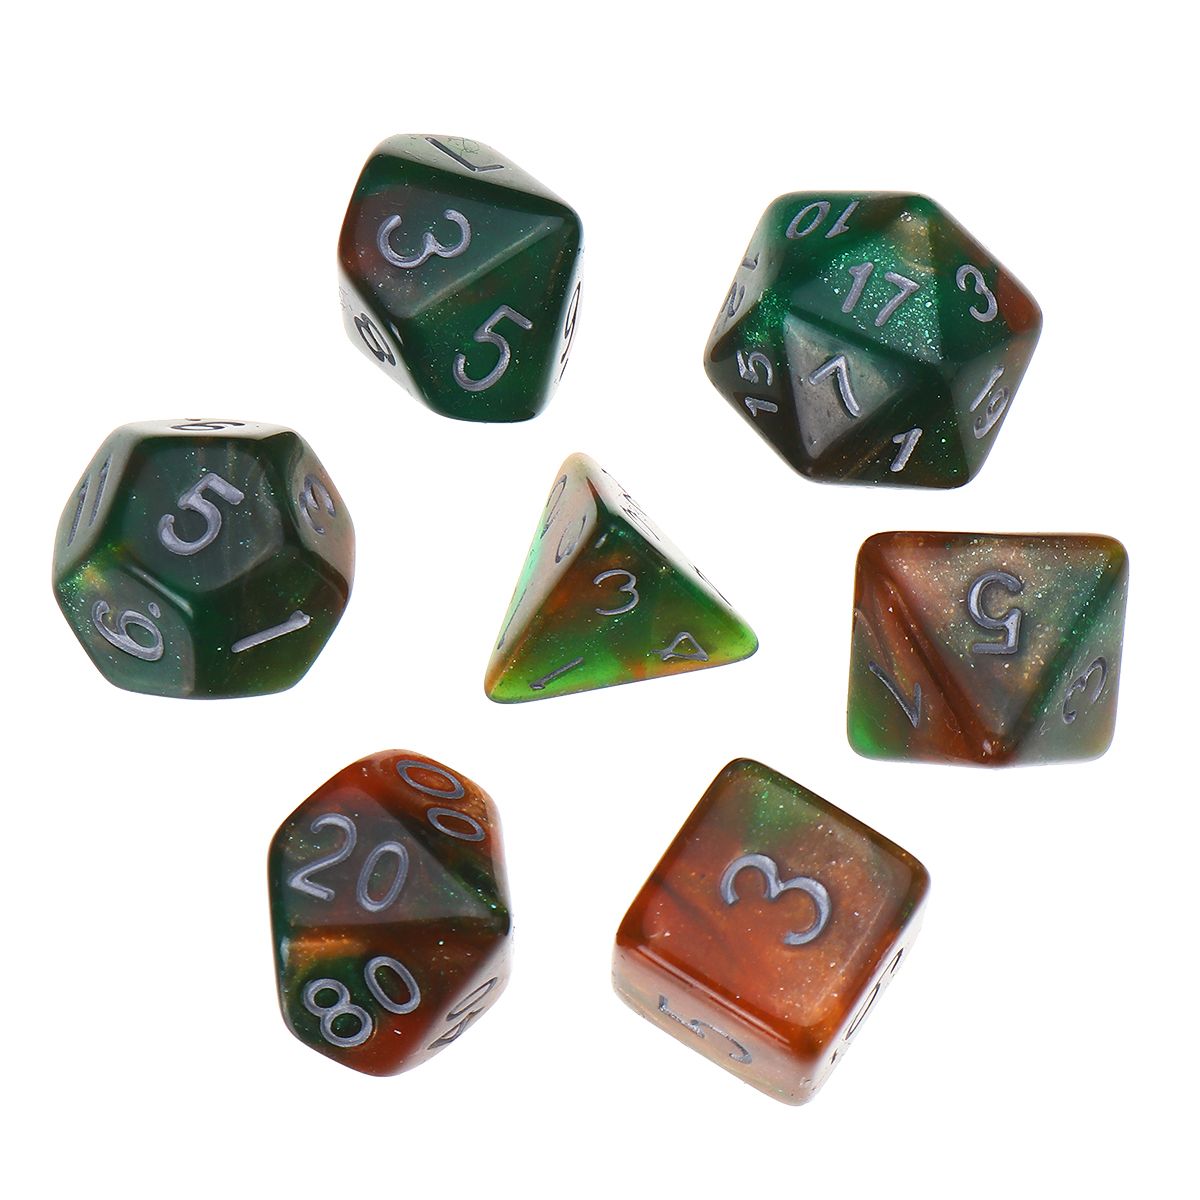 35pcs-Set-Polyhedral-Dices-DND-RPG-MTG-Role-Playing-Board-Game-Dices-Set-1623064